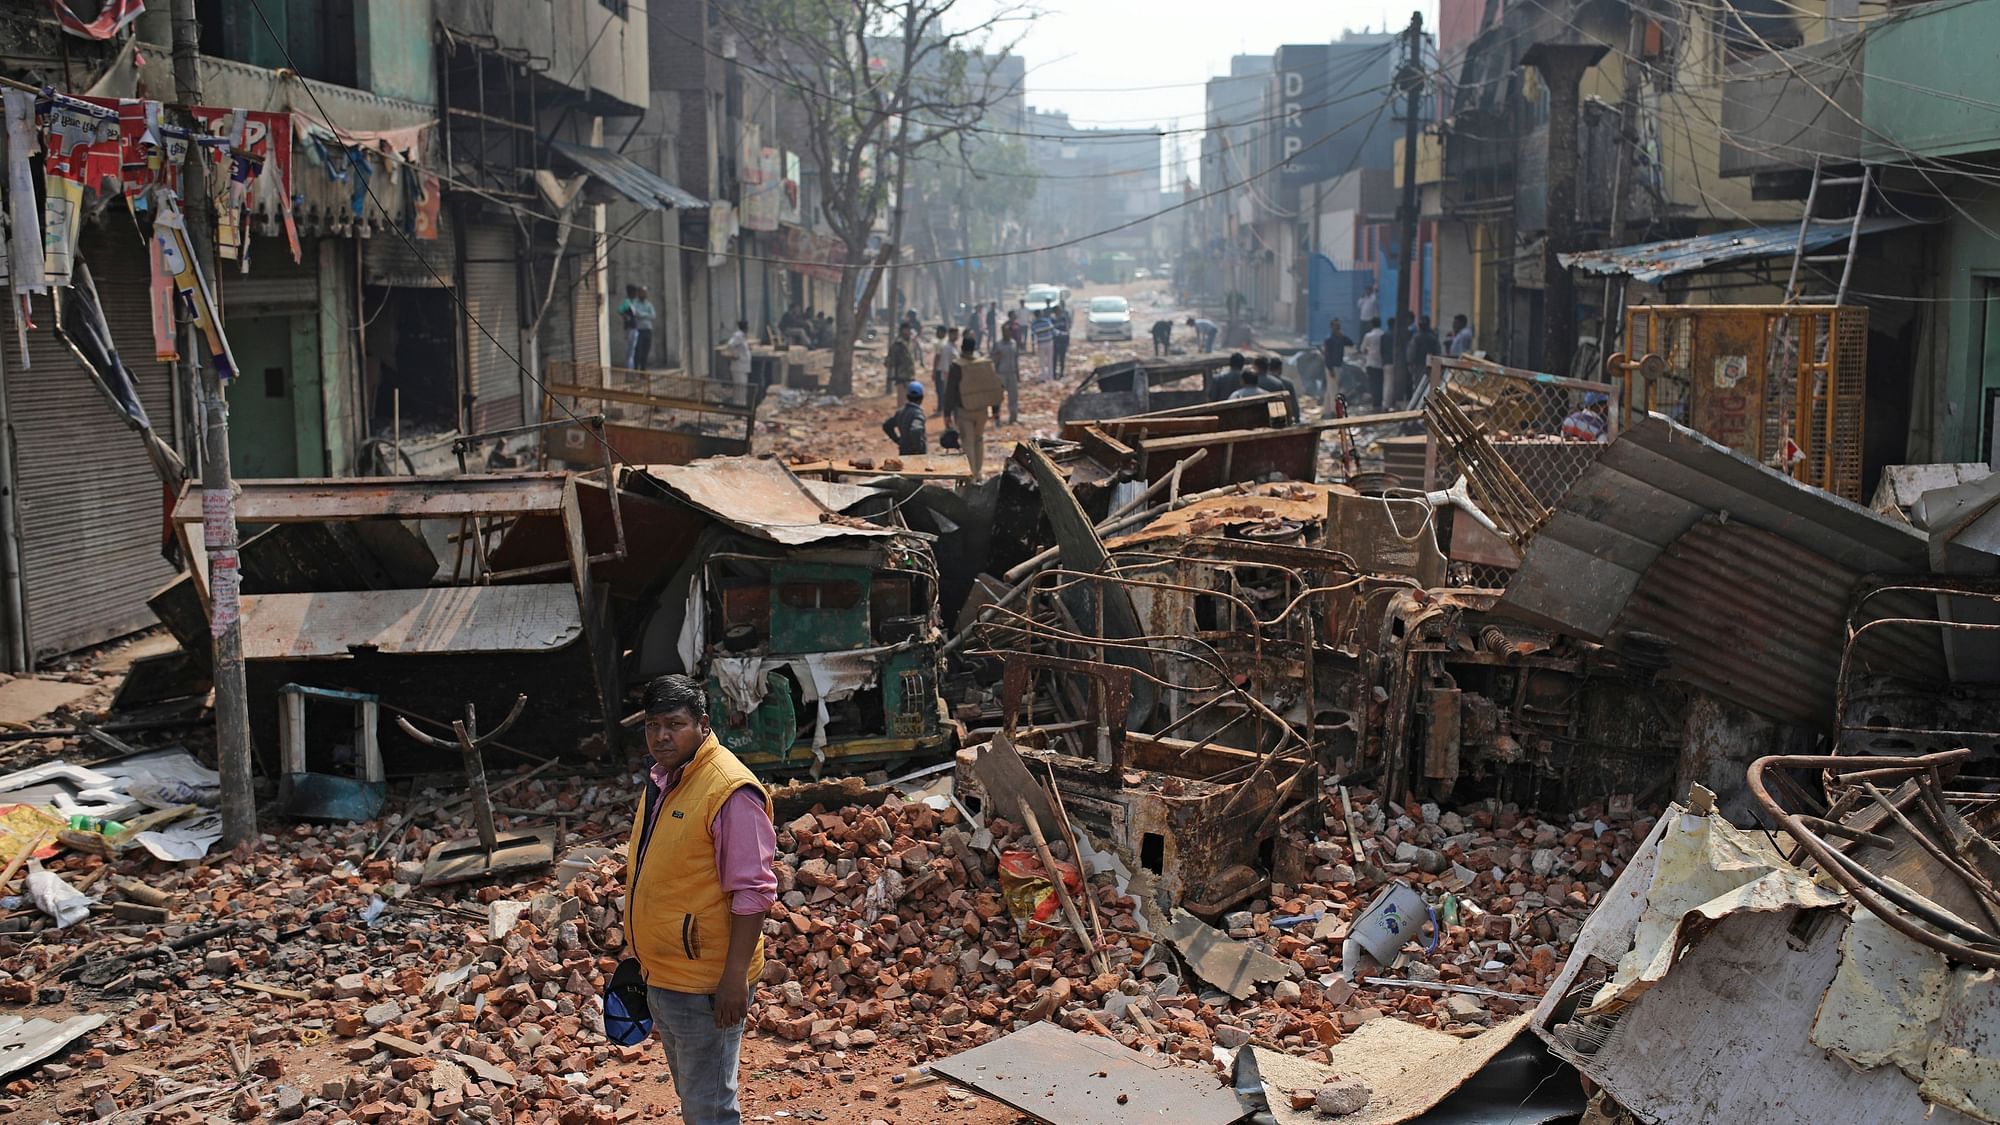 A Delhi municipal worker stands next to the remains of vehicles, and other materials on a street vandalised in violence in New Delhi, on  27 February.